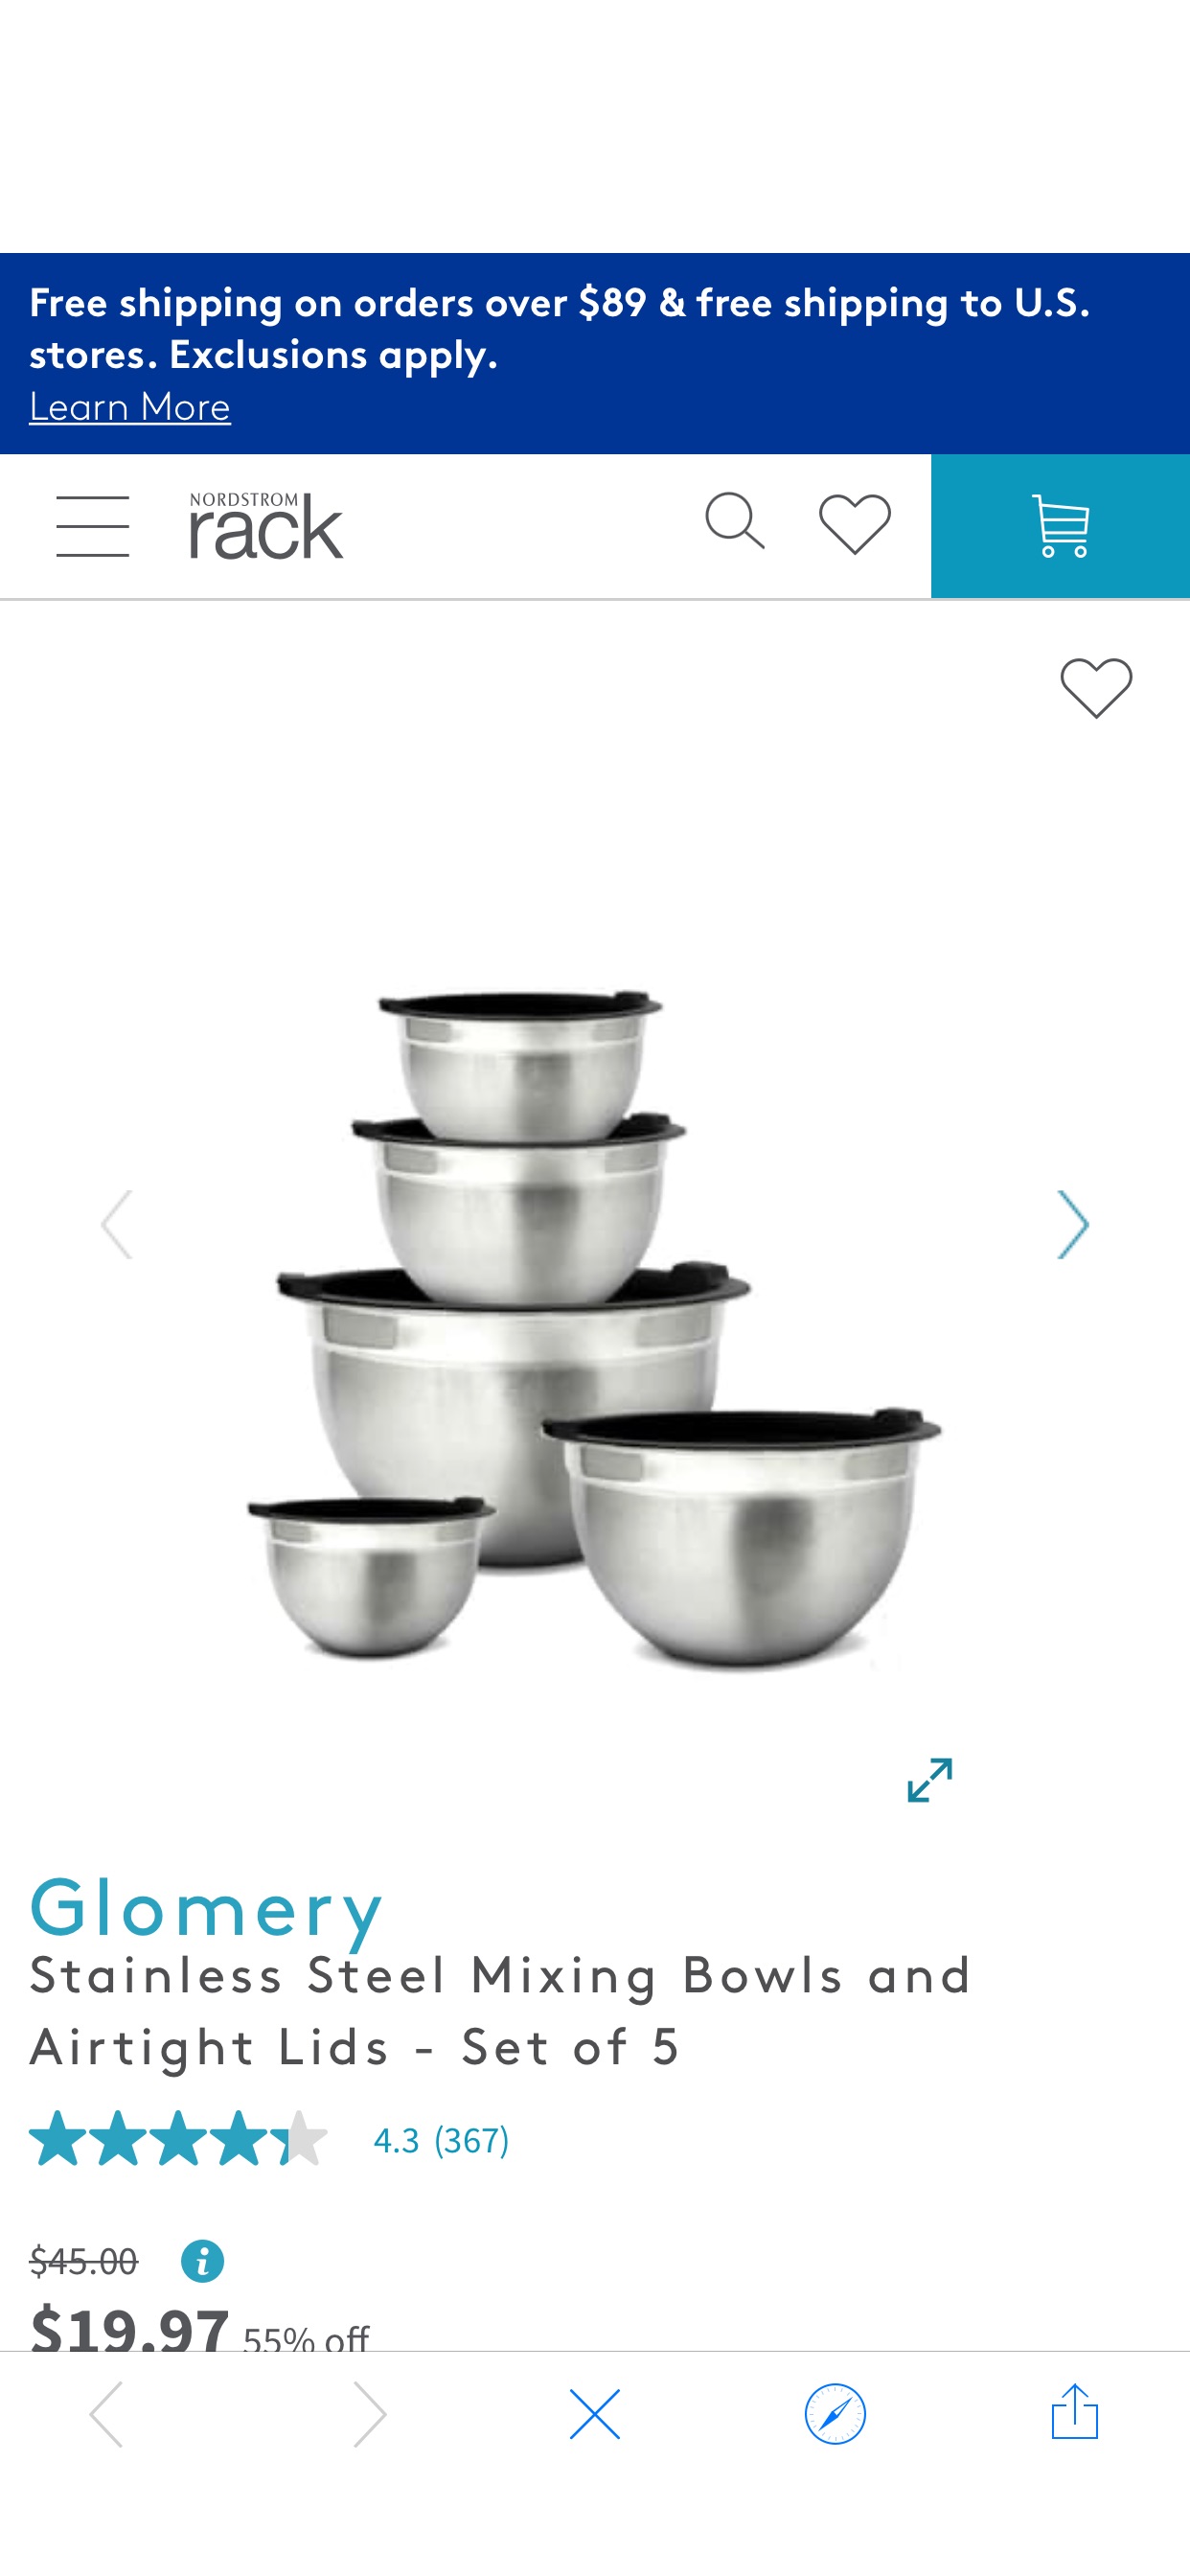 Glomery 不锈钢五件套-带盖搅拌碗| Stainless Steel Mixing Bowls and Airtight Lids - Set of 5 | Nordstrom Rack